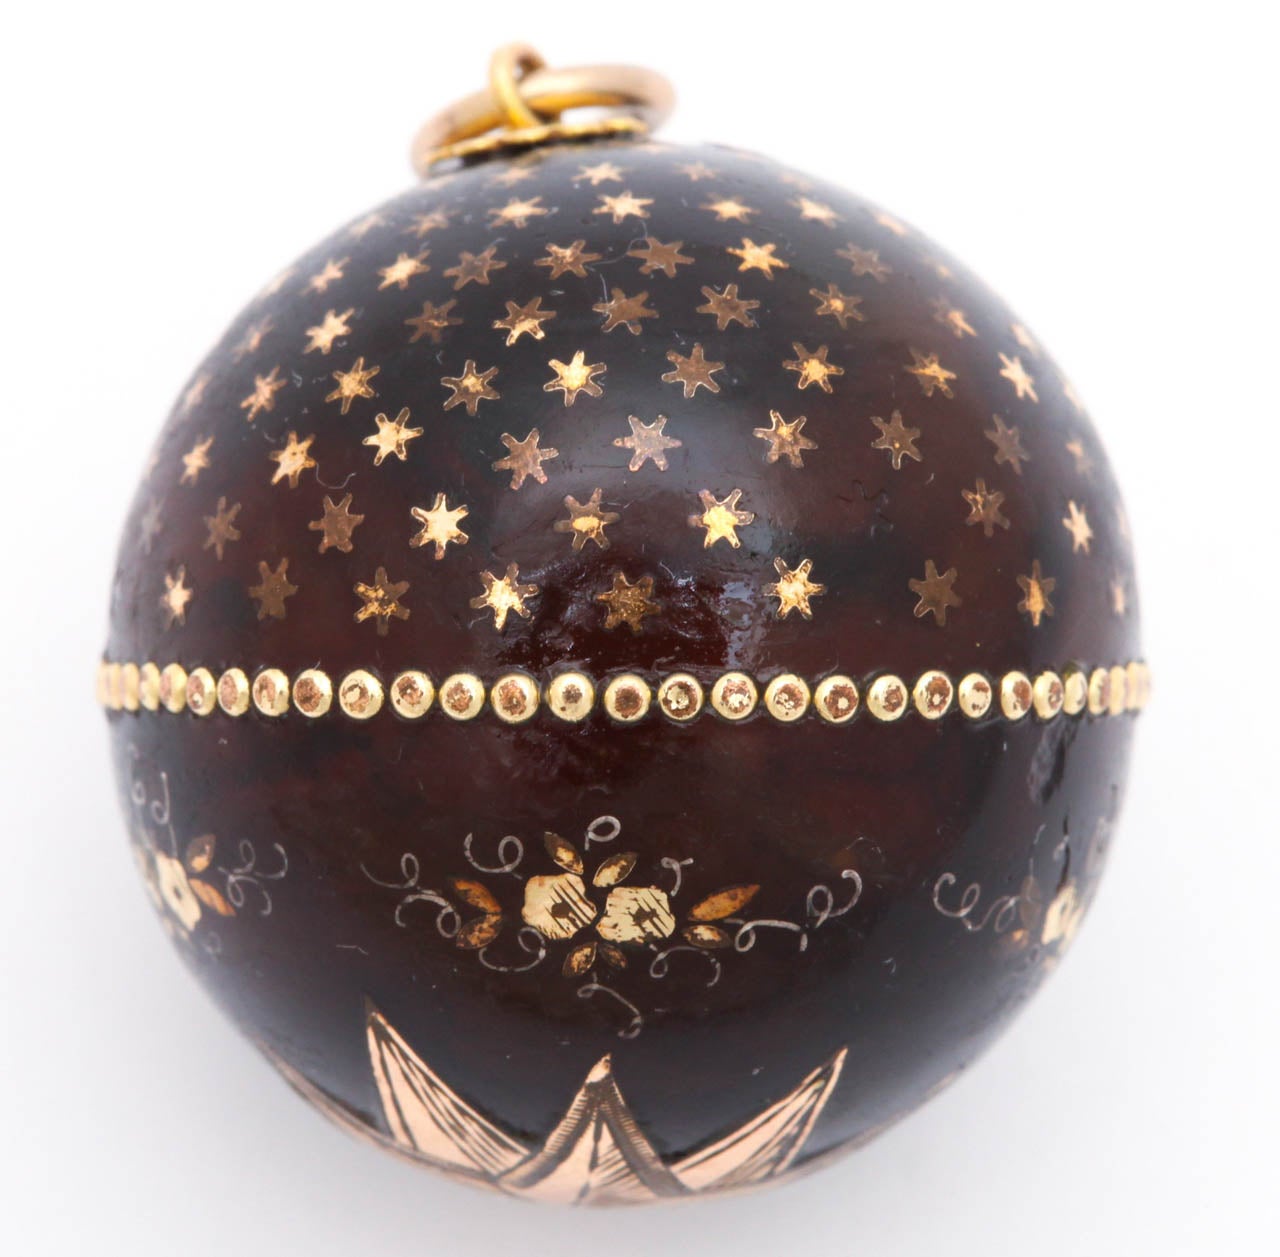 Gold stars and flowers with tendrils were incised in the shed shell of the Hawksbill tortoise during the Victorian years 1870-1890. As in the night sky, some stars are not bright, others are bright.  Complicated designs such as this were time